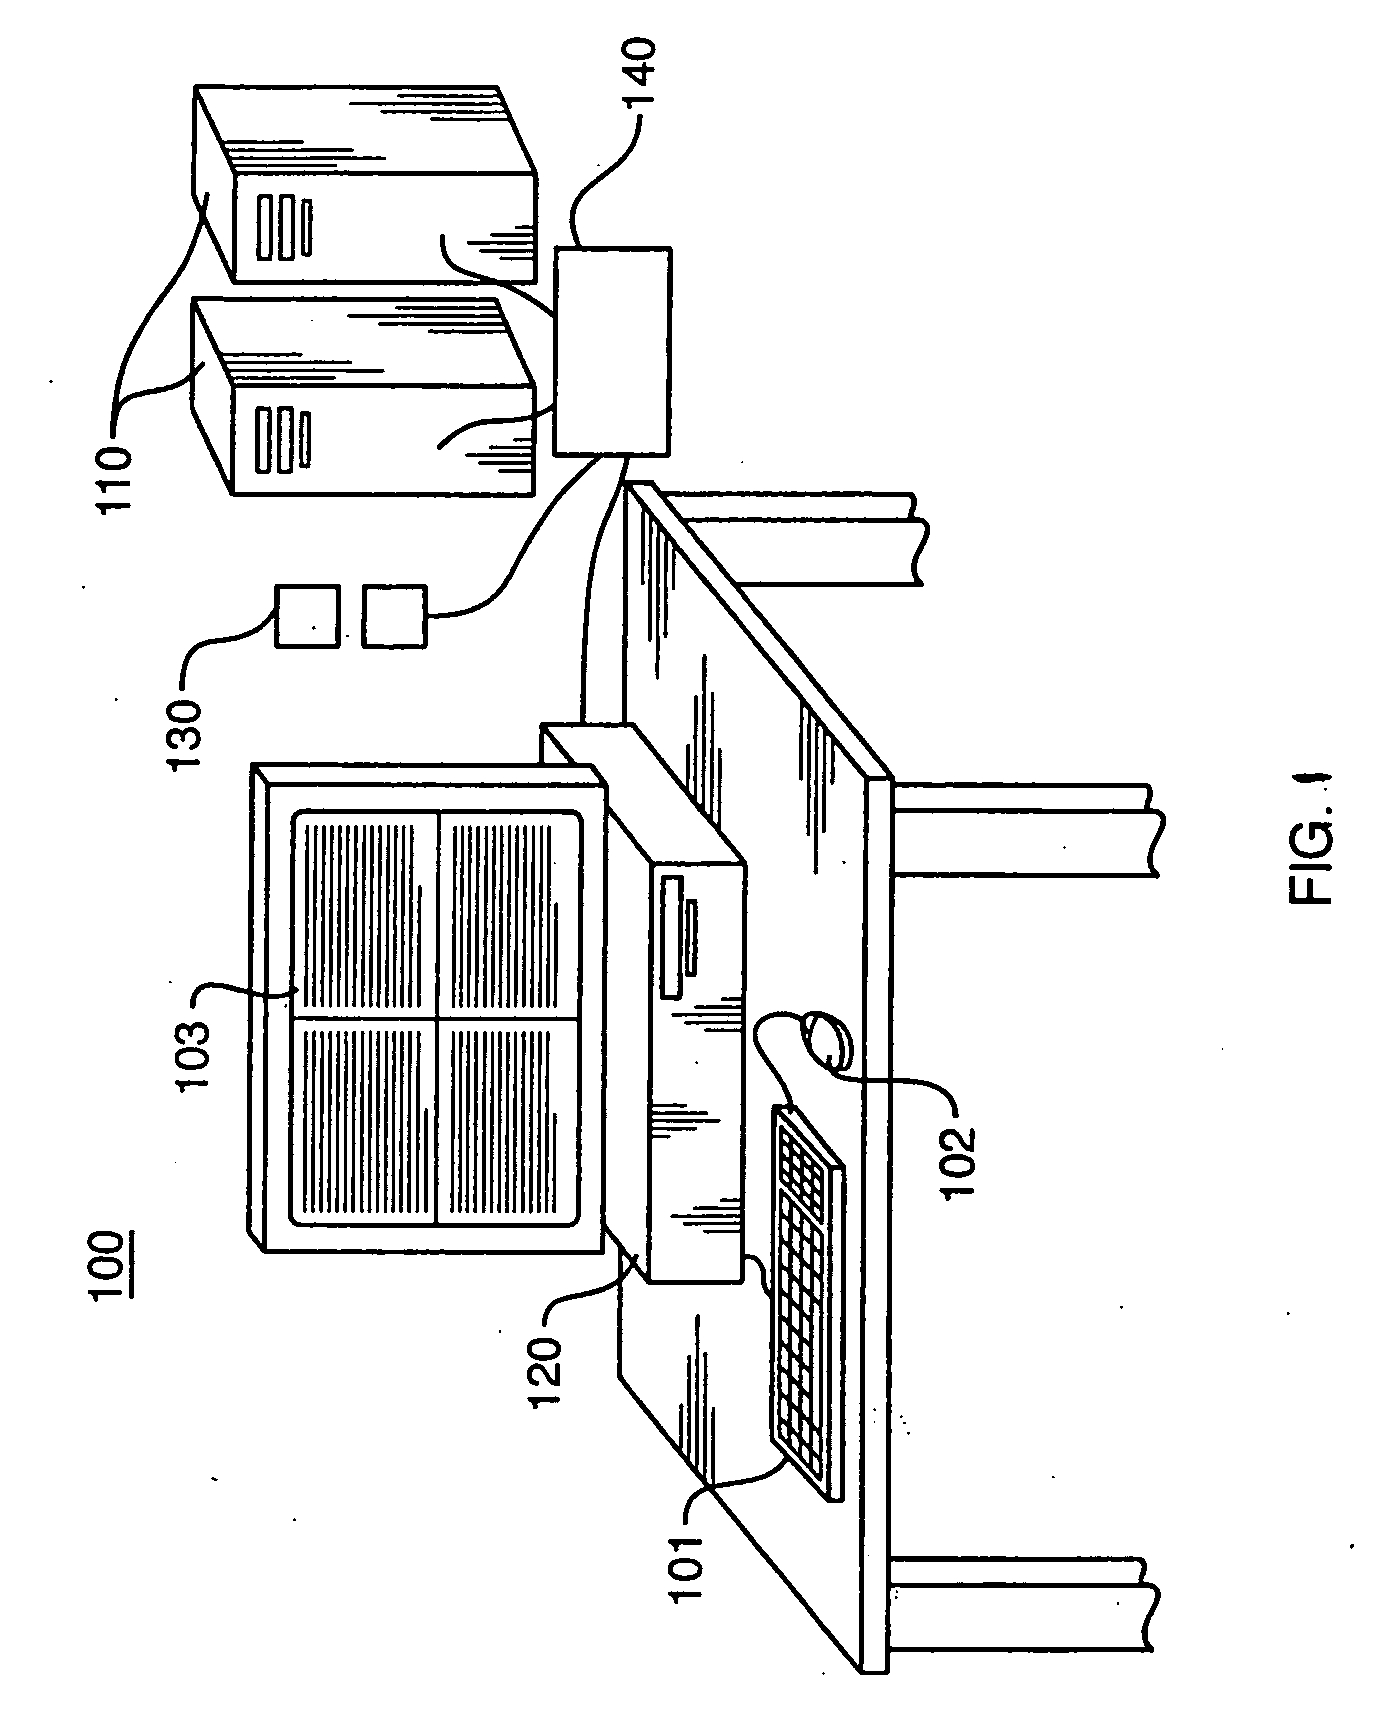 Multidimensional modeling system and related method